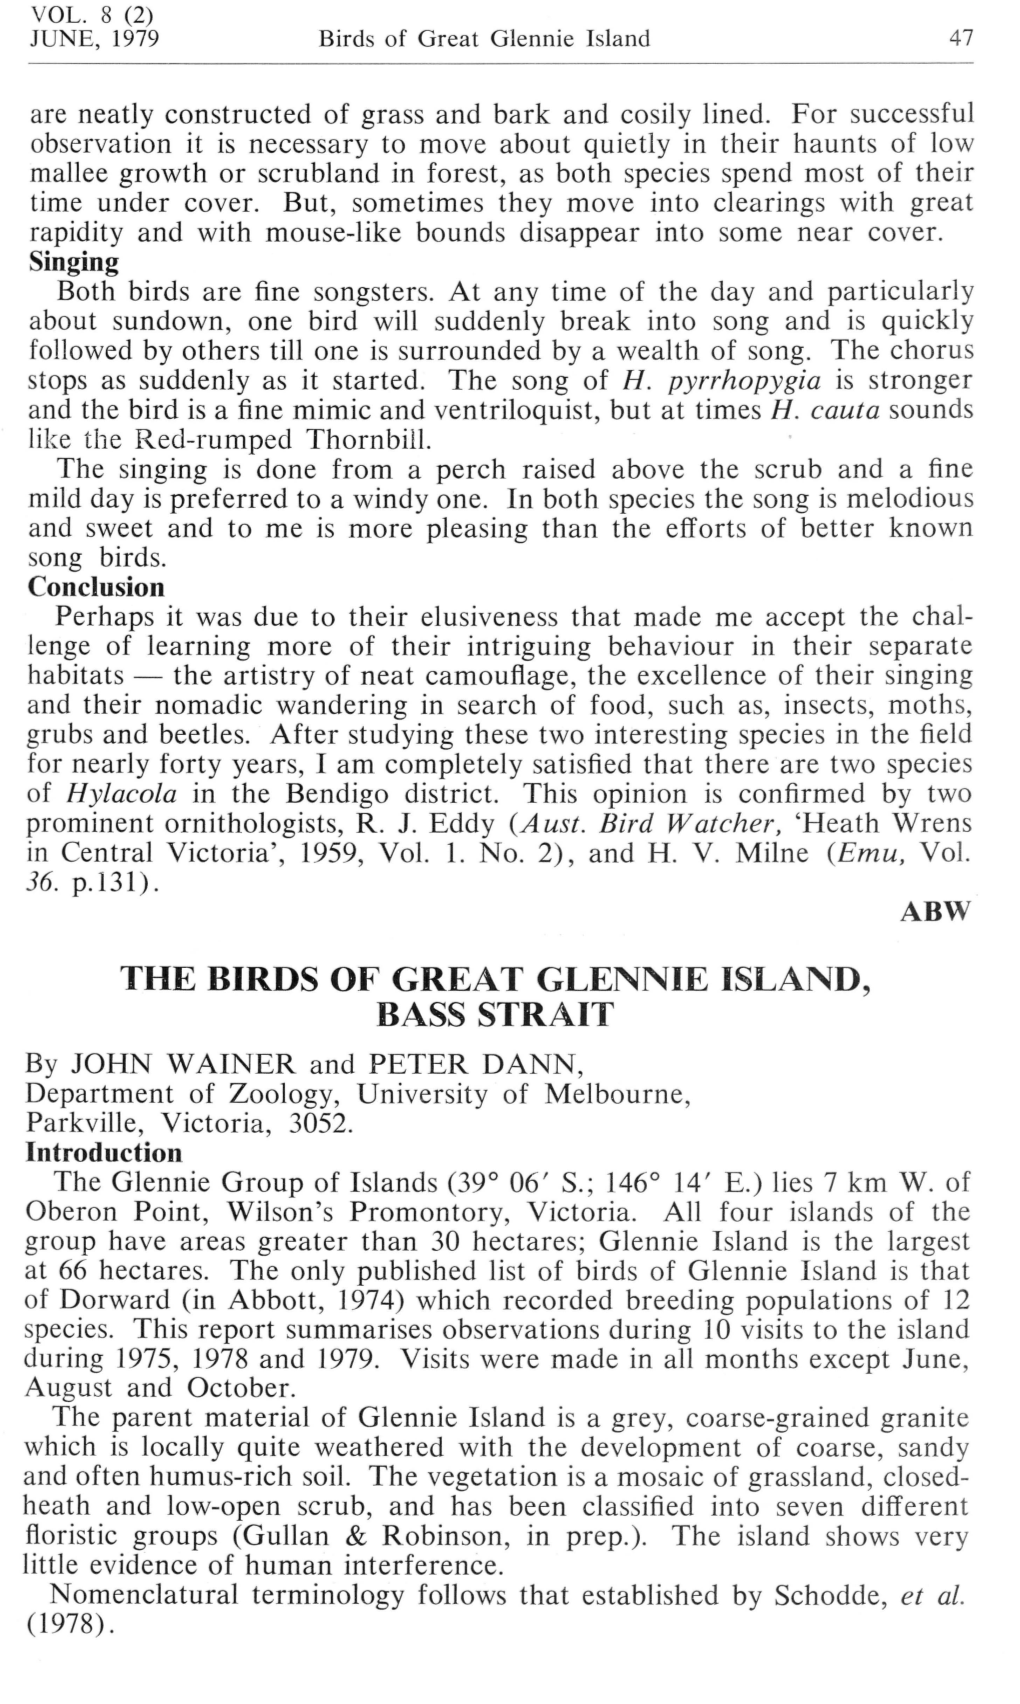 THE BIRDS of GREAT GLENNIE ISLAND, BASS STRAIT by JOHN WAINER and PETER DANN, Department of Zoology, University of Melbourne, Parkville, Victoria, 3052